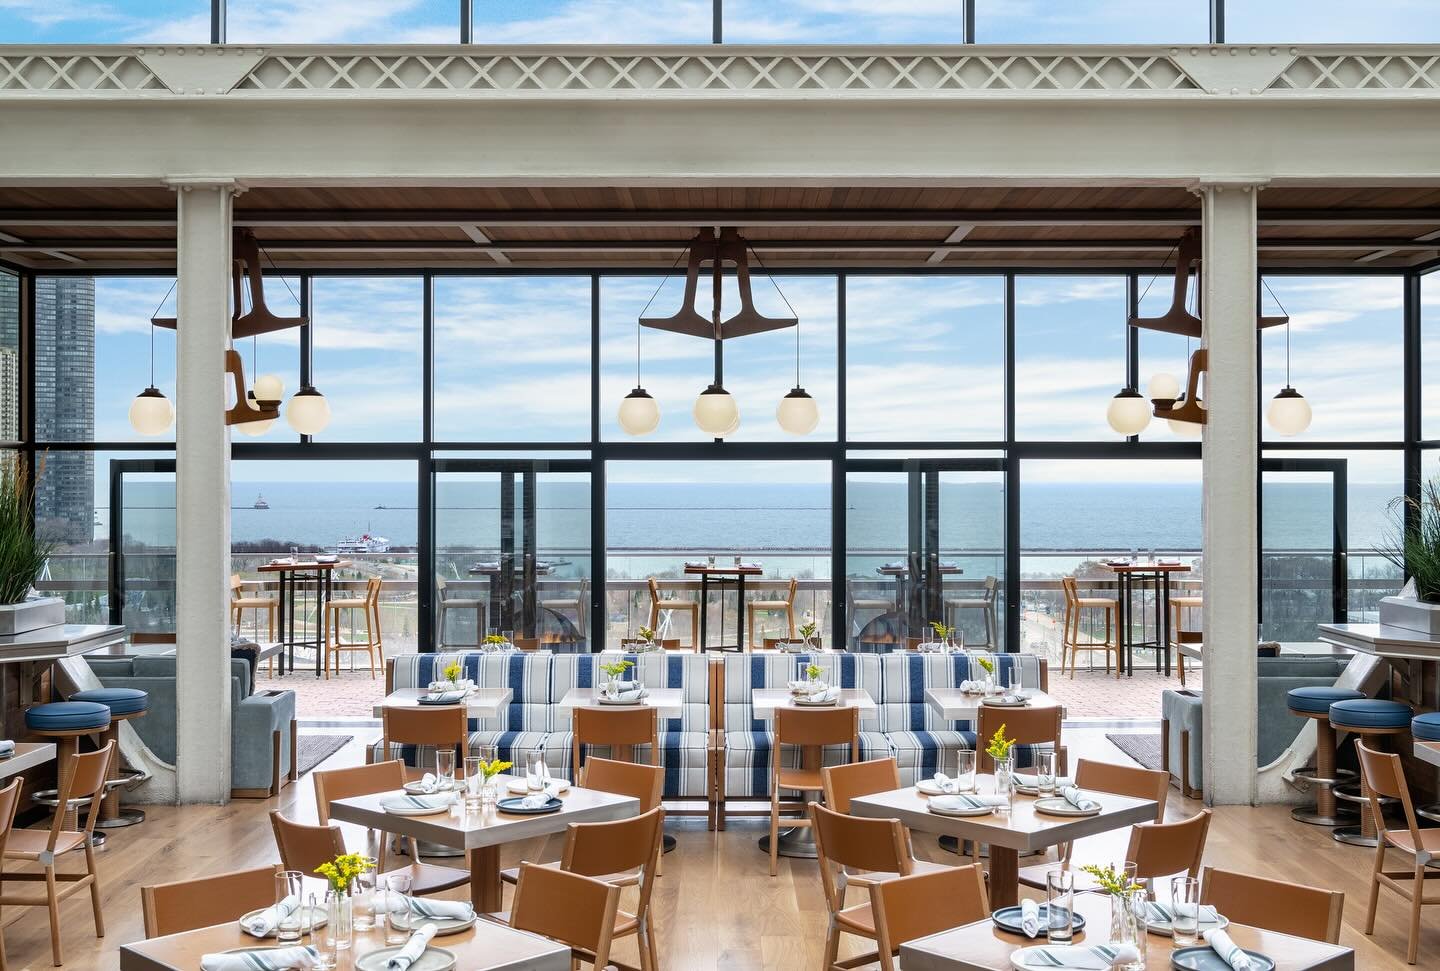 Within the existing steel atrium structure at Cindy&rsquo;s Rooftop, the refreshed look and feel was driven by its expansive views of Lake Michigan. Emphasizing the stunning architectural details already in place, we layered in lakehouse-inspired ele